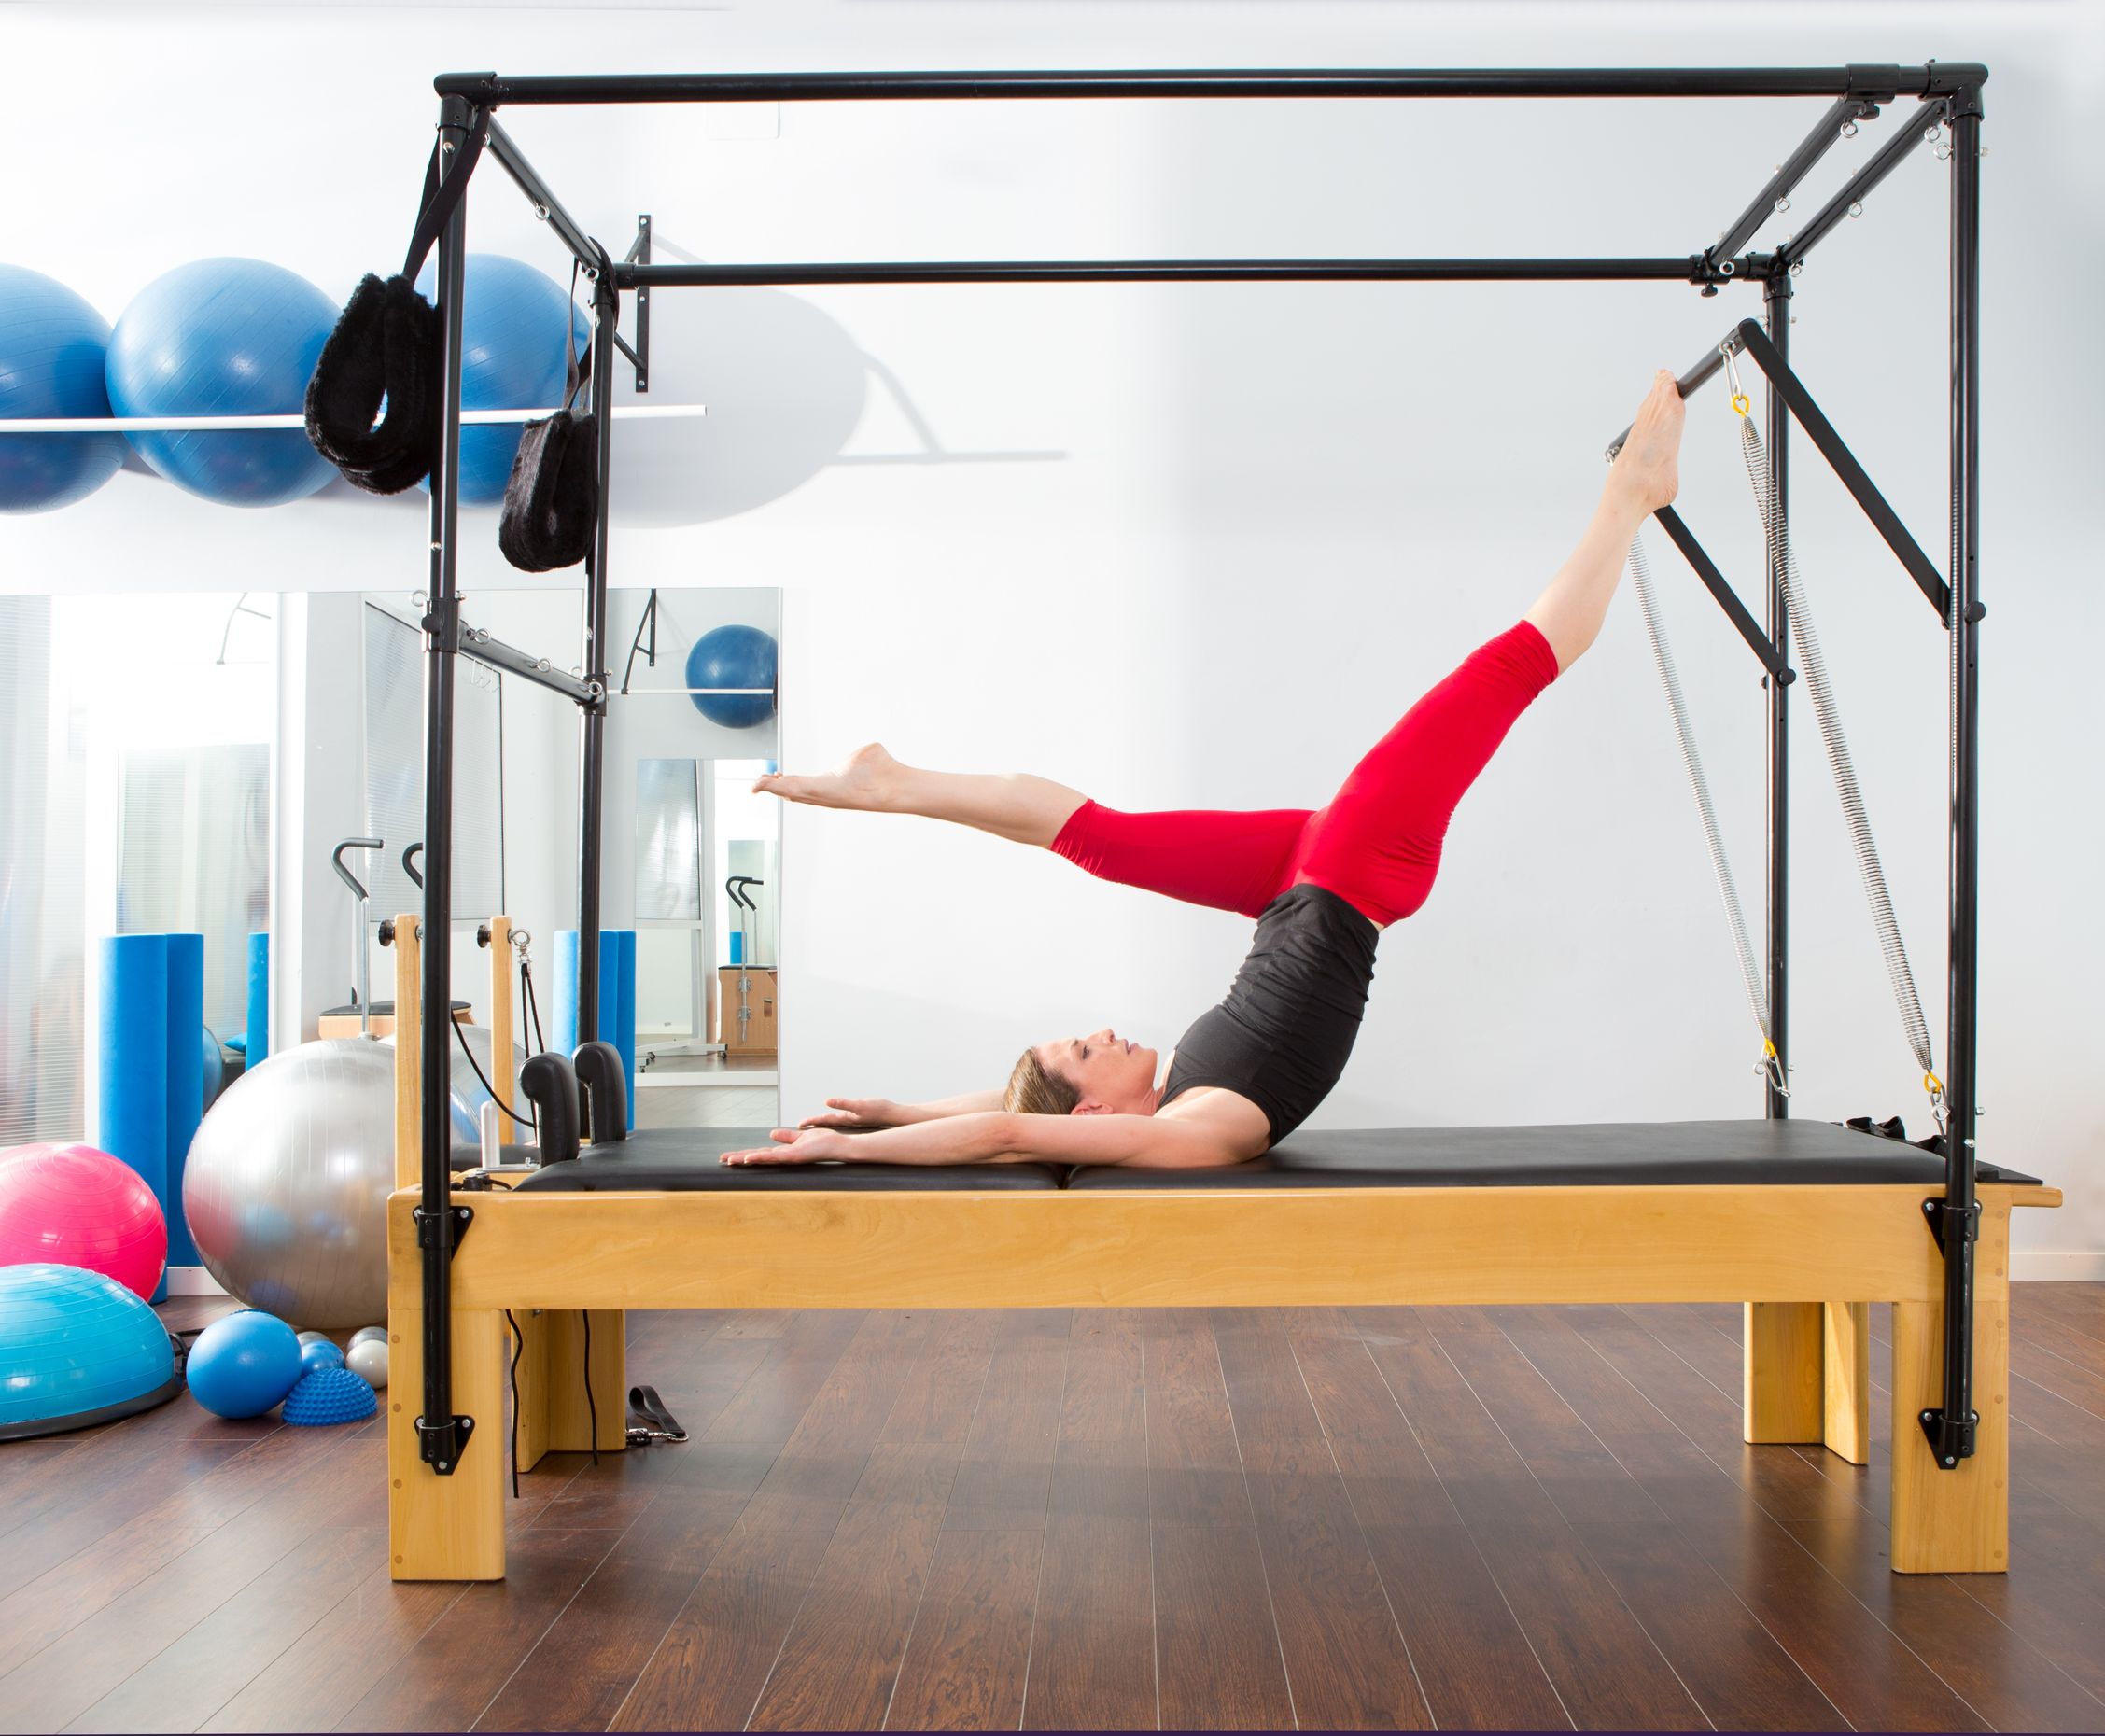 Control – learn how one of the pilates principals can help fight depression.